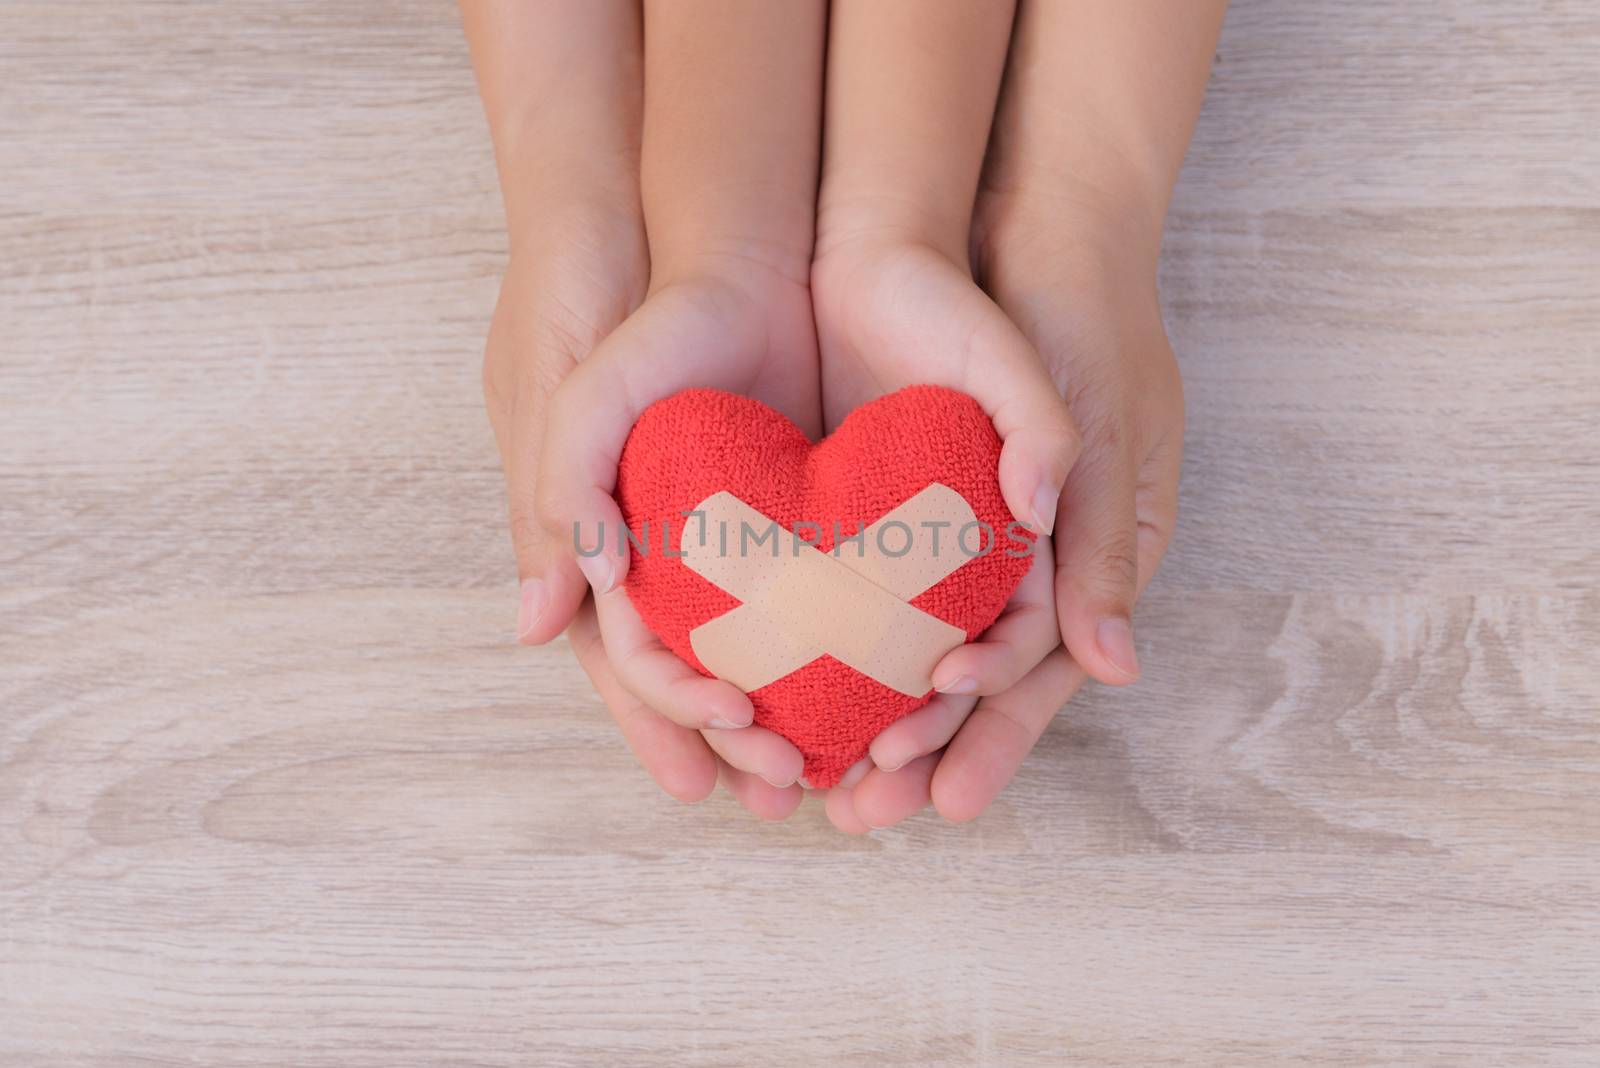 Health care, love, organ donation, family insurance and CSR concept. adult and child hands holding handmade red heart on wooden background. First Aid Band Cushioned Plaster Strip Medical Patch glued on red heart.